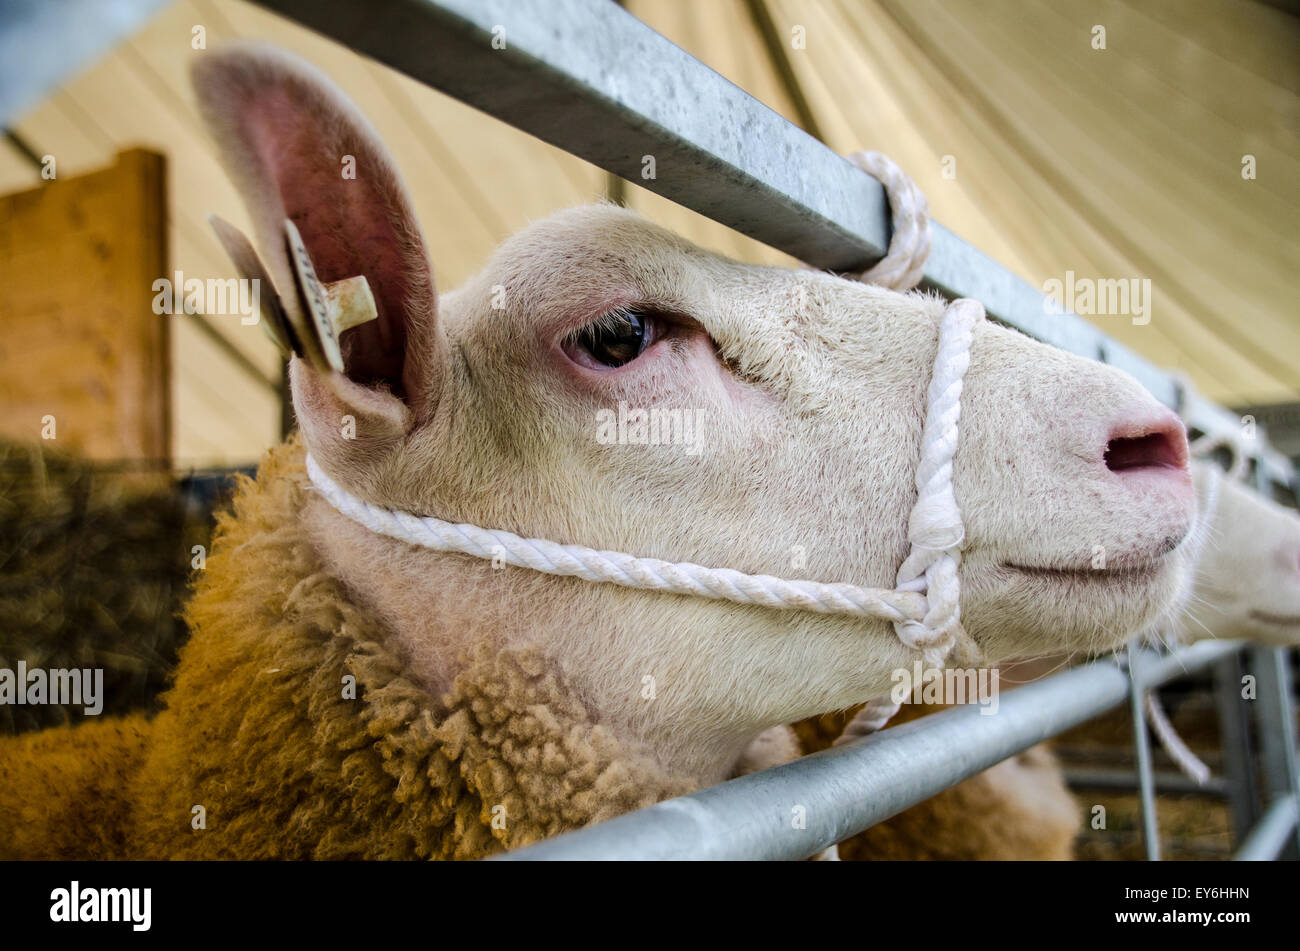 Sheep in pen at agricultural show awaiting judging Stock Photo